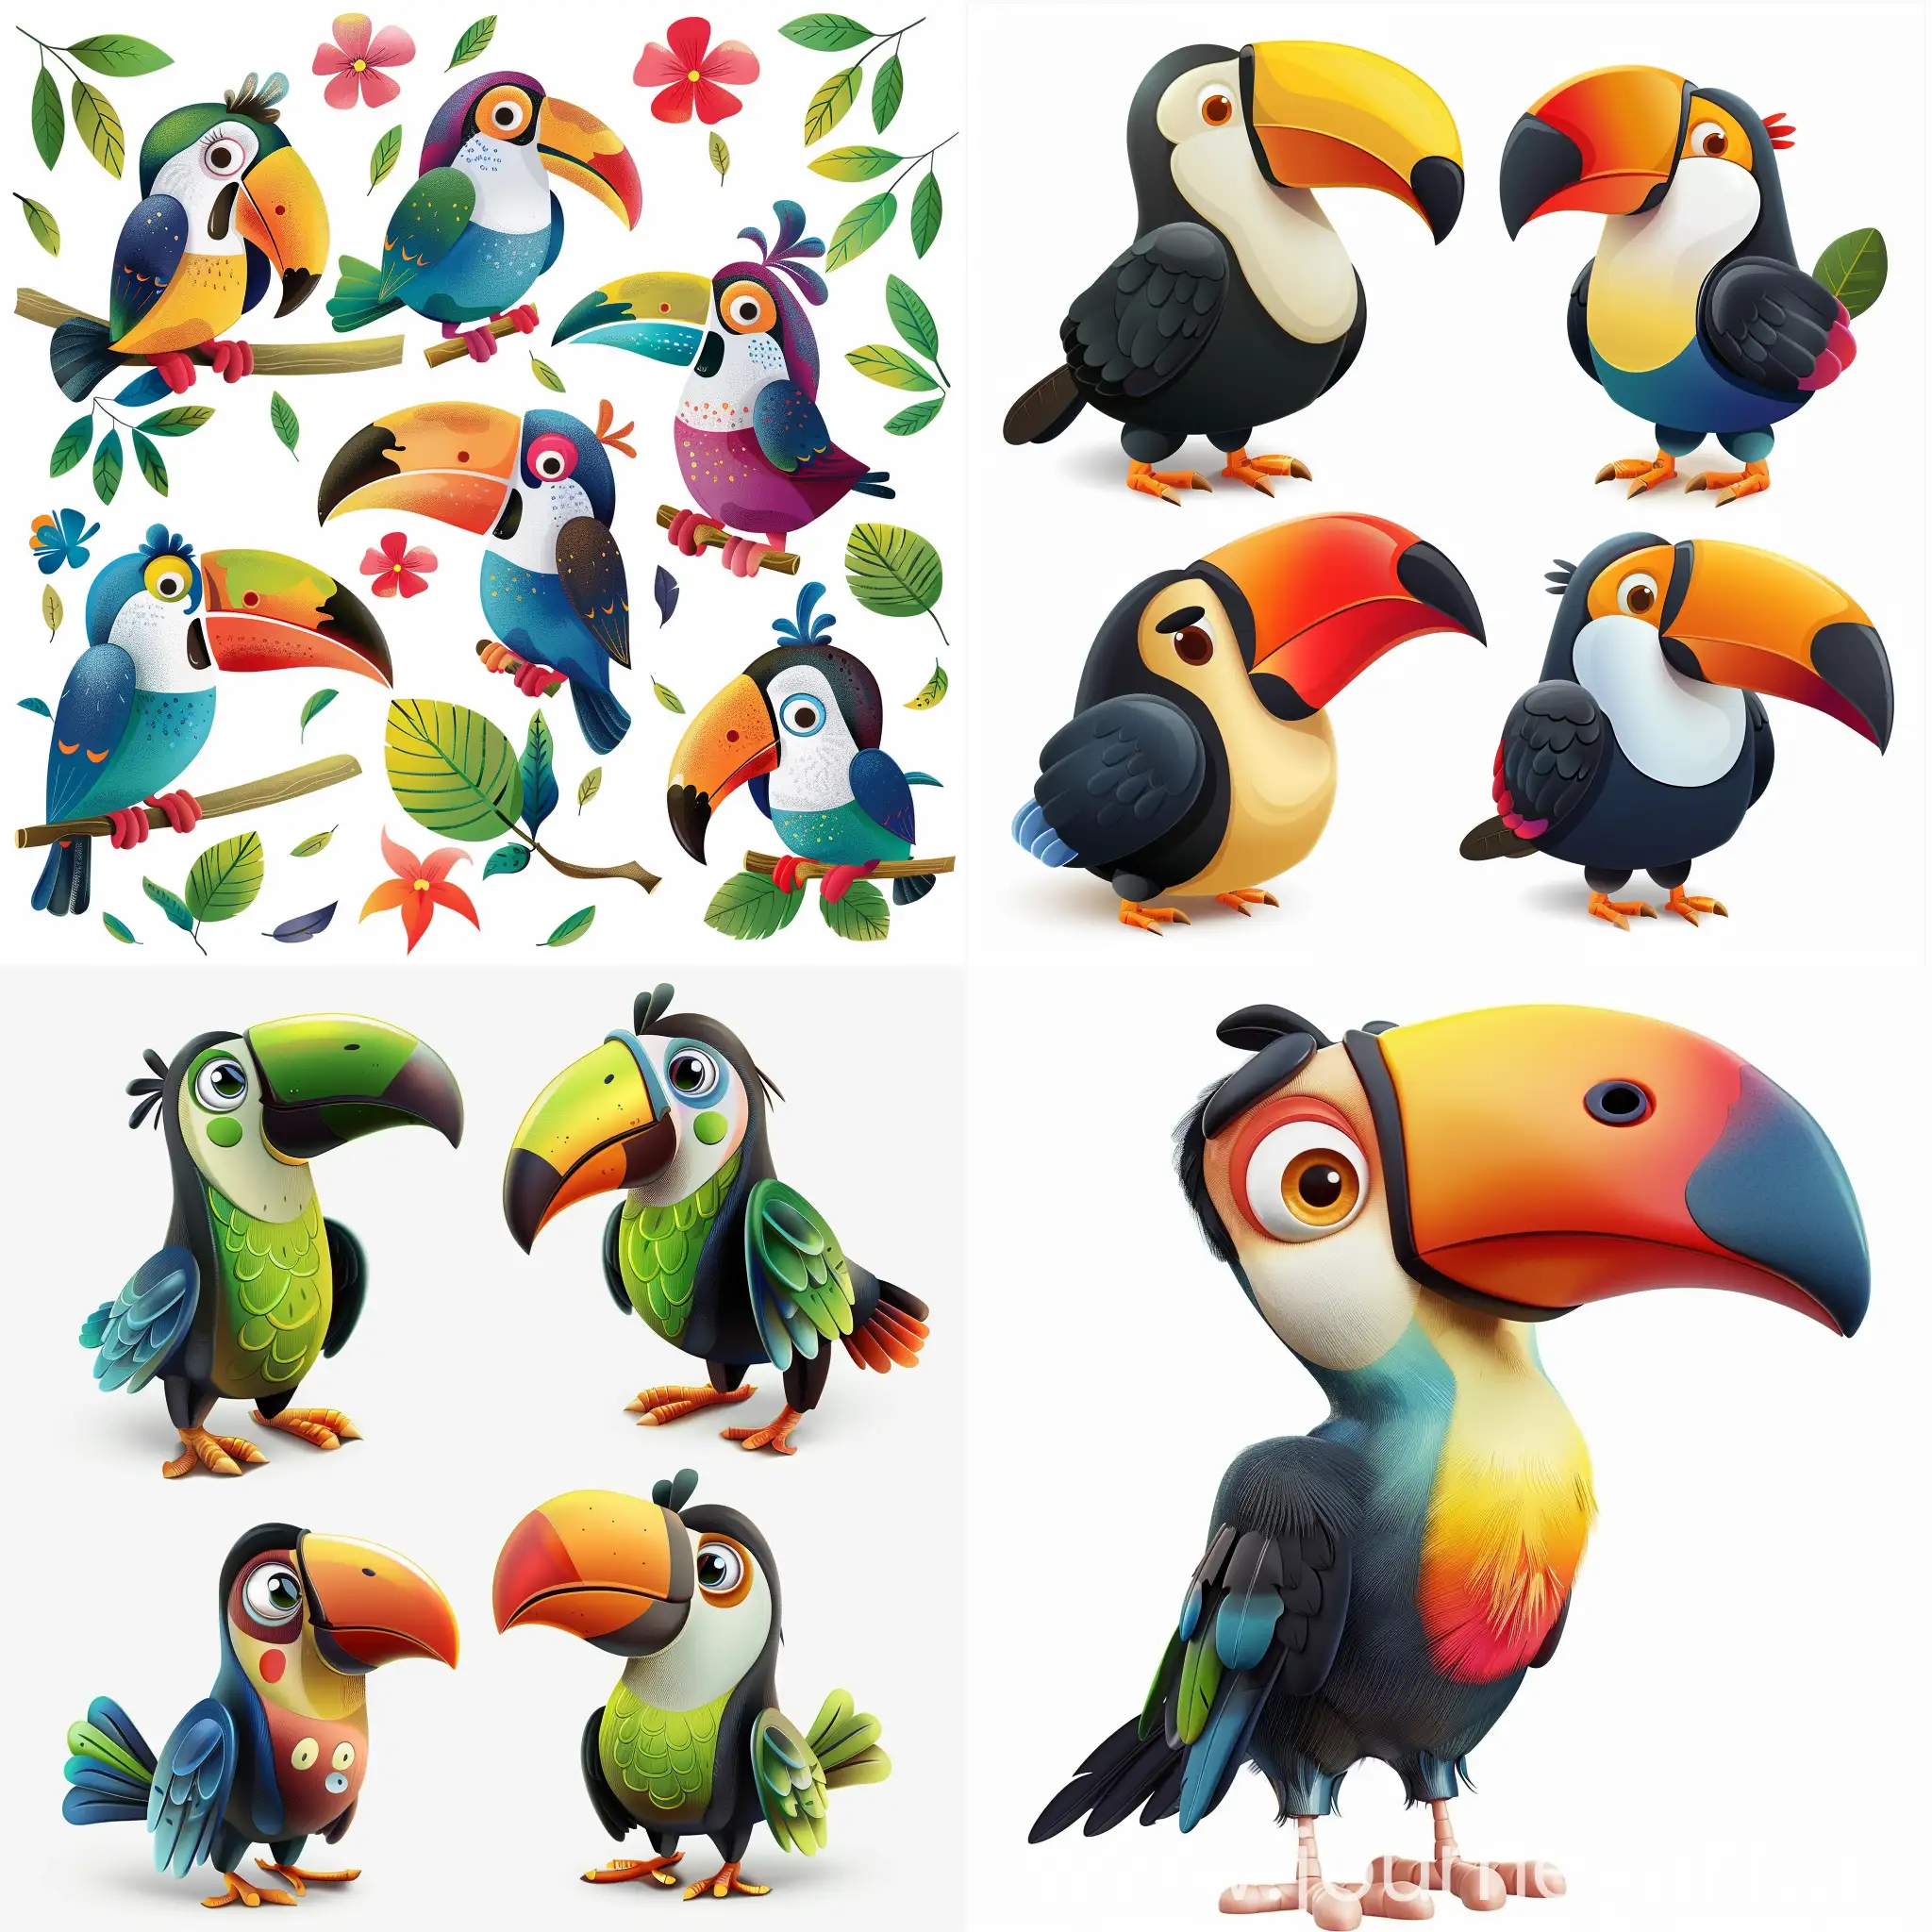 Adorable-Colorful-Toucan-Characters-for-Toddlers-on-White-Background